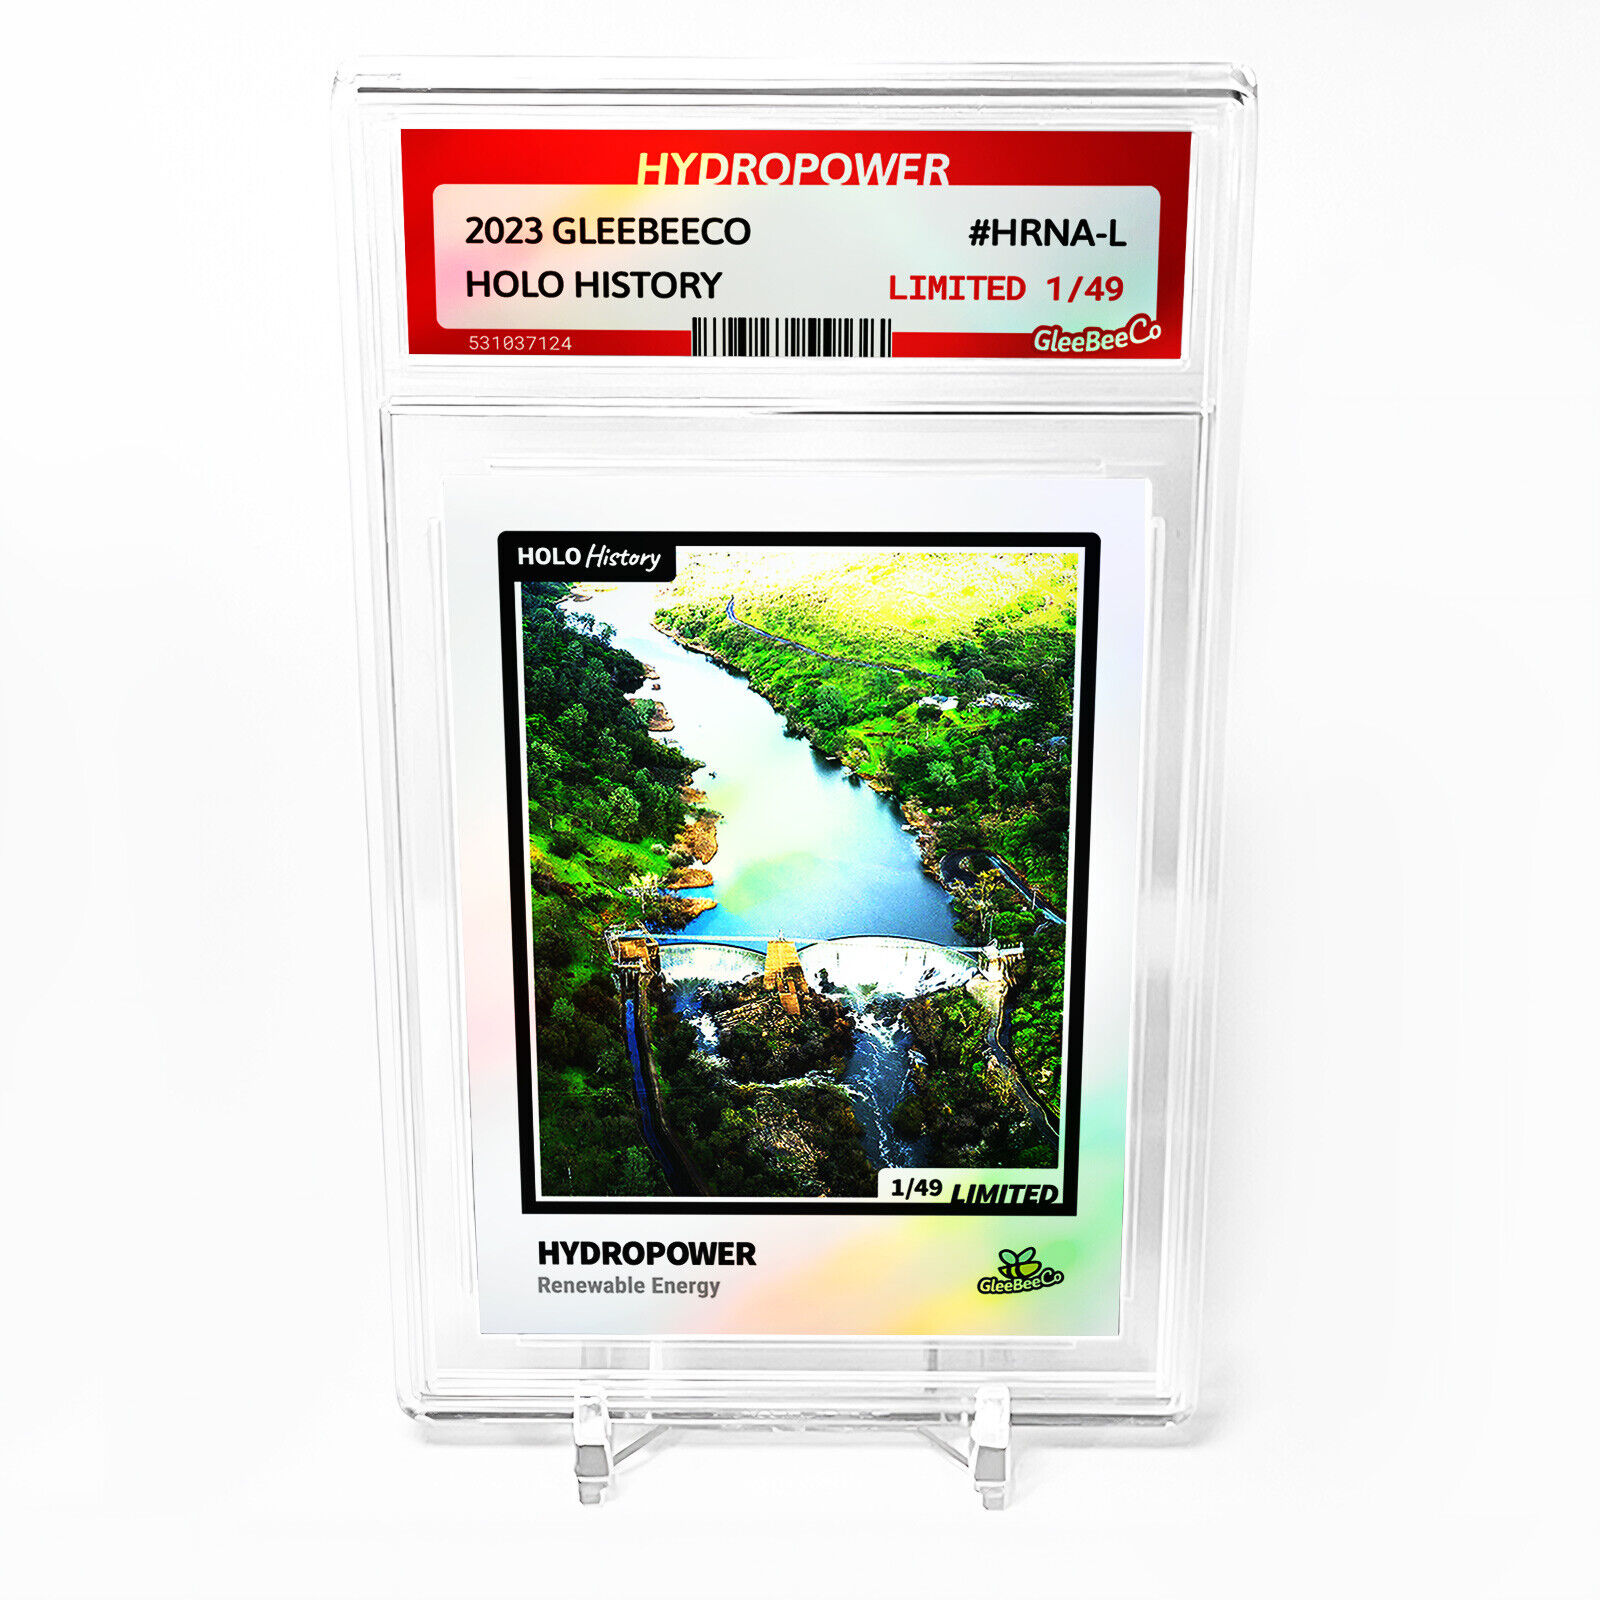 HYDROPOWER Renewable Energy Card GleeBeeCo Holo History (Slab) #HRNA-L Only /49